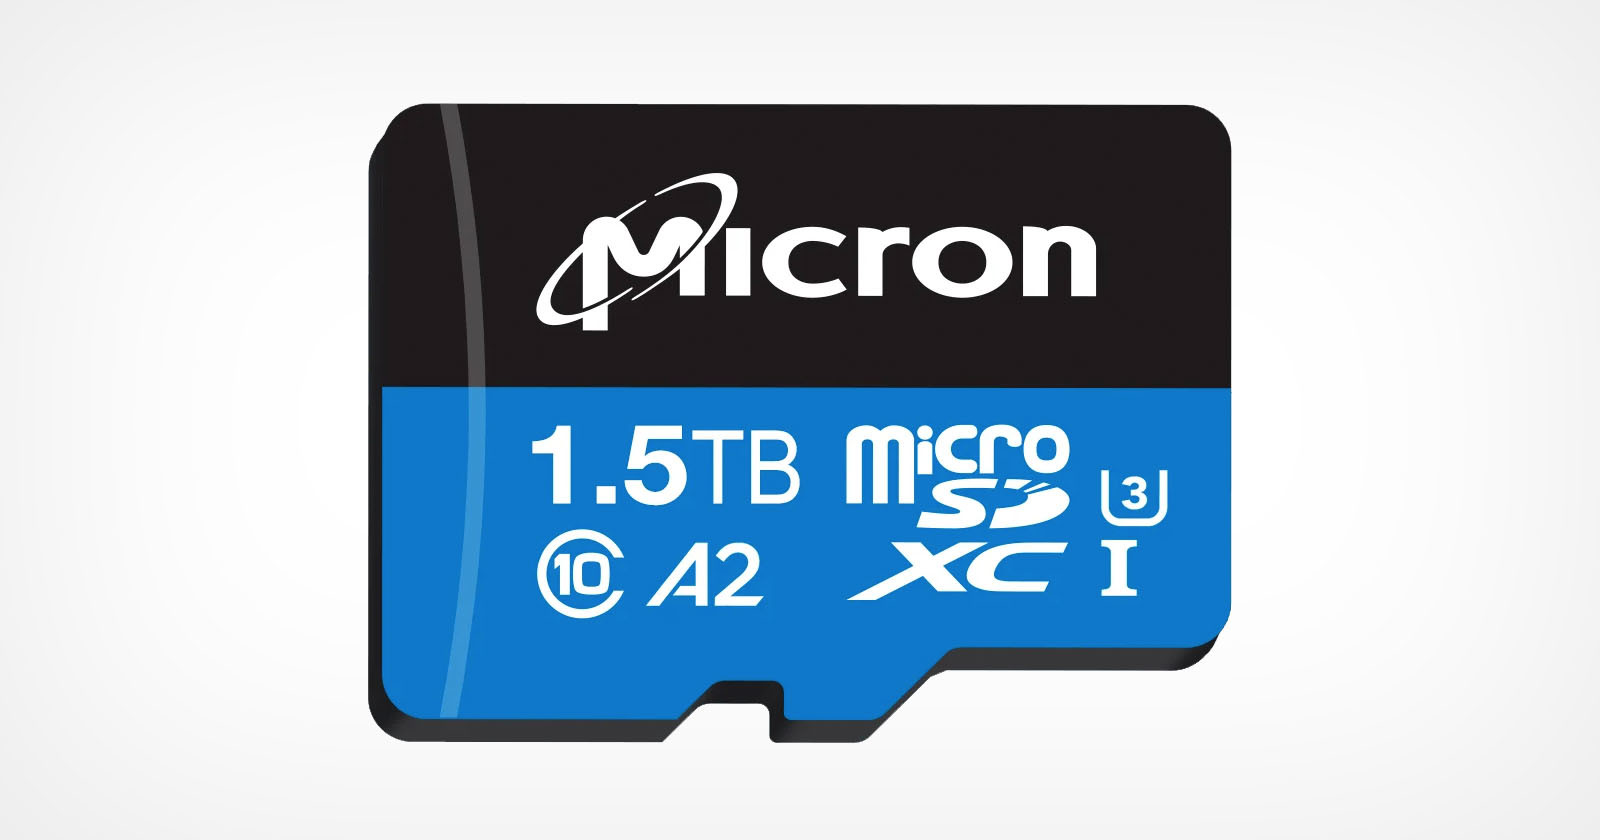 Micron’s Record-Setting 1.5TB microSD Card Stores 4 Months of Video